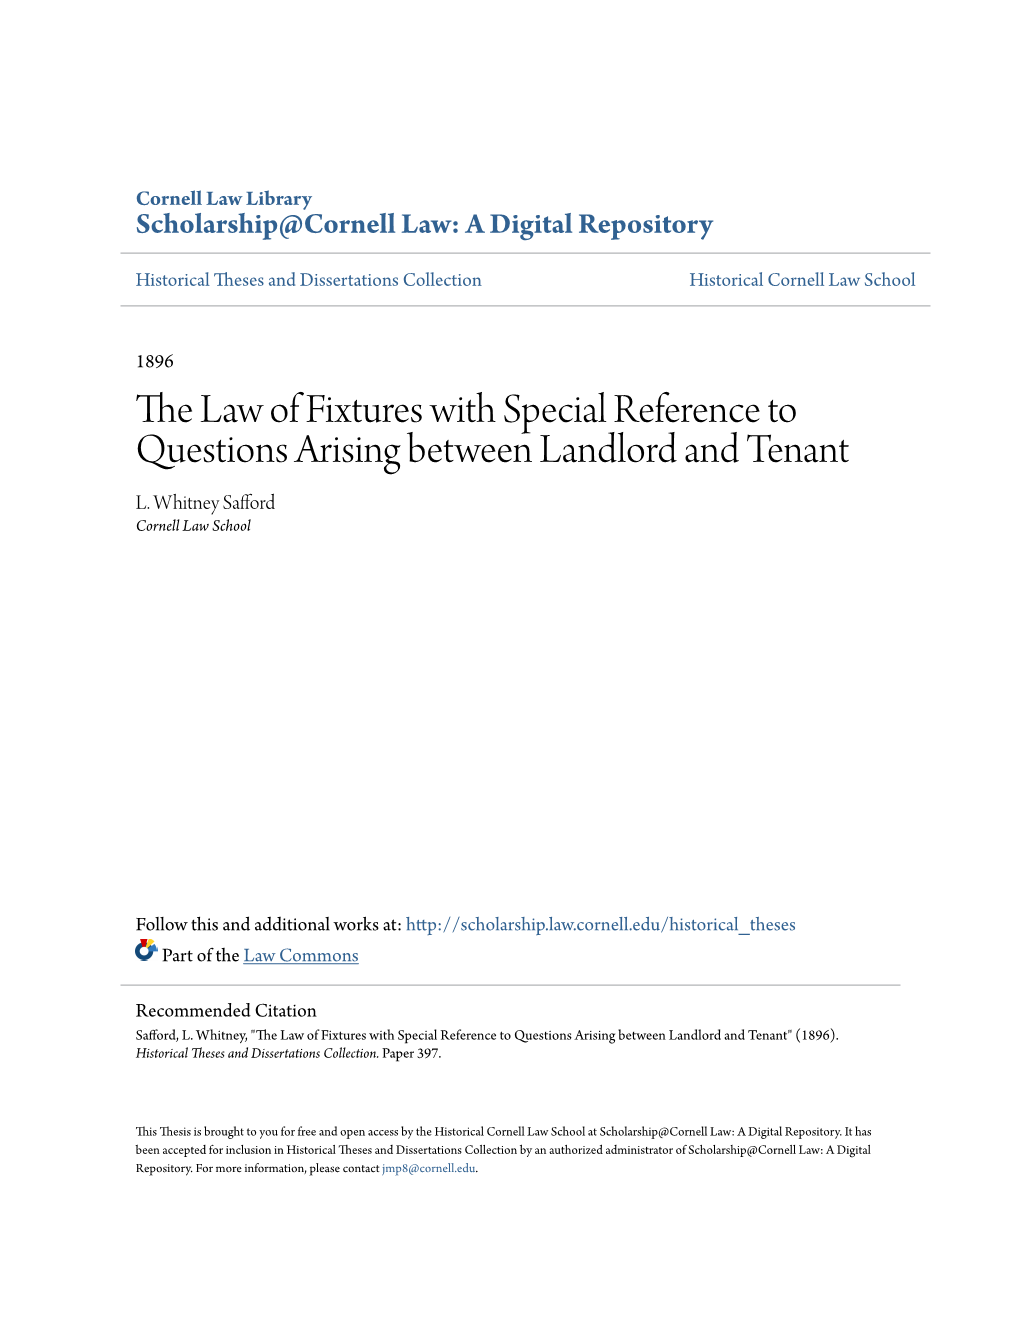 The Law of Fixtures with Special Reference to Questions Arising Between Landlord and Tenant L